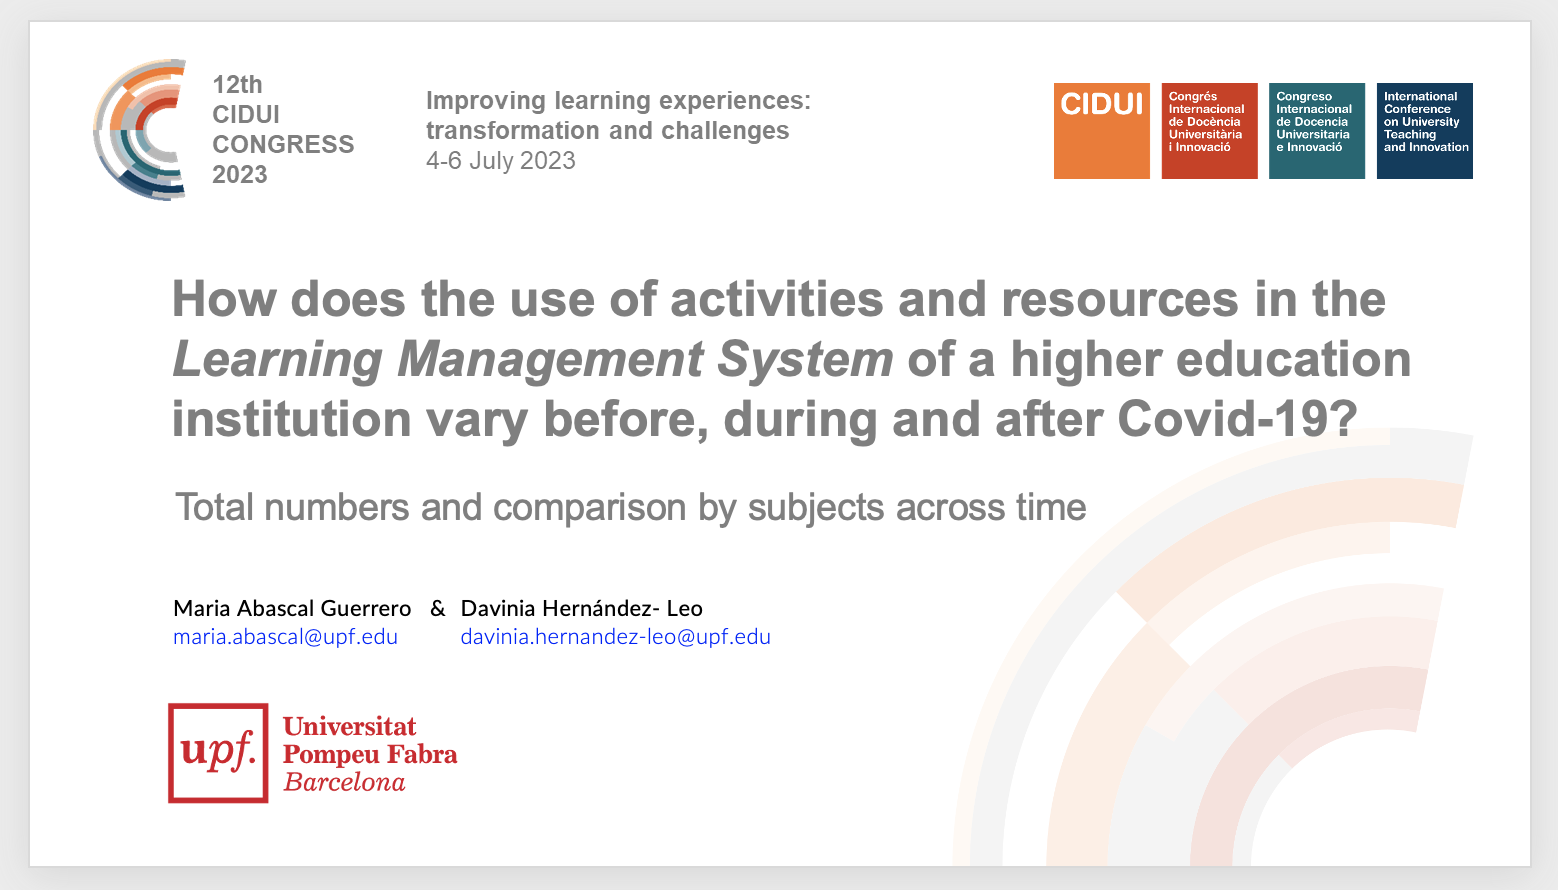 How does the use of activities and resources in the Learning Management System of a higher education institution vary before, during and after Covid-19?